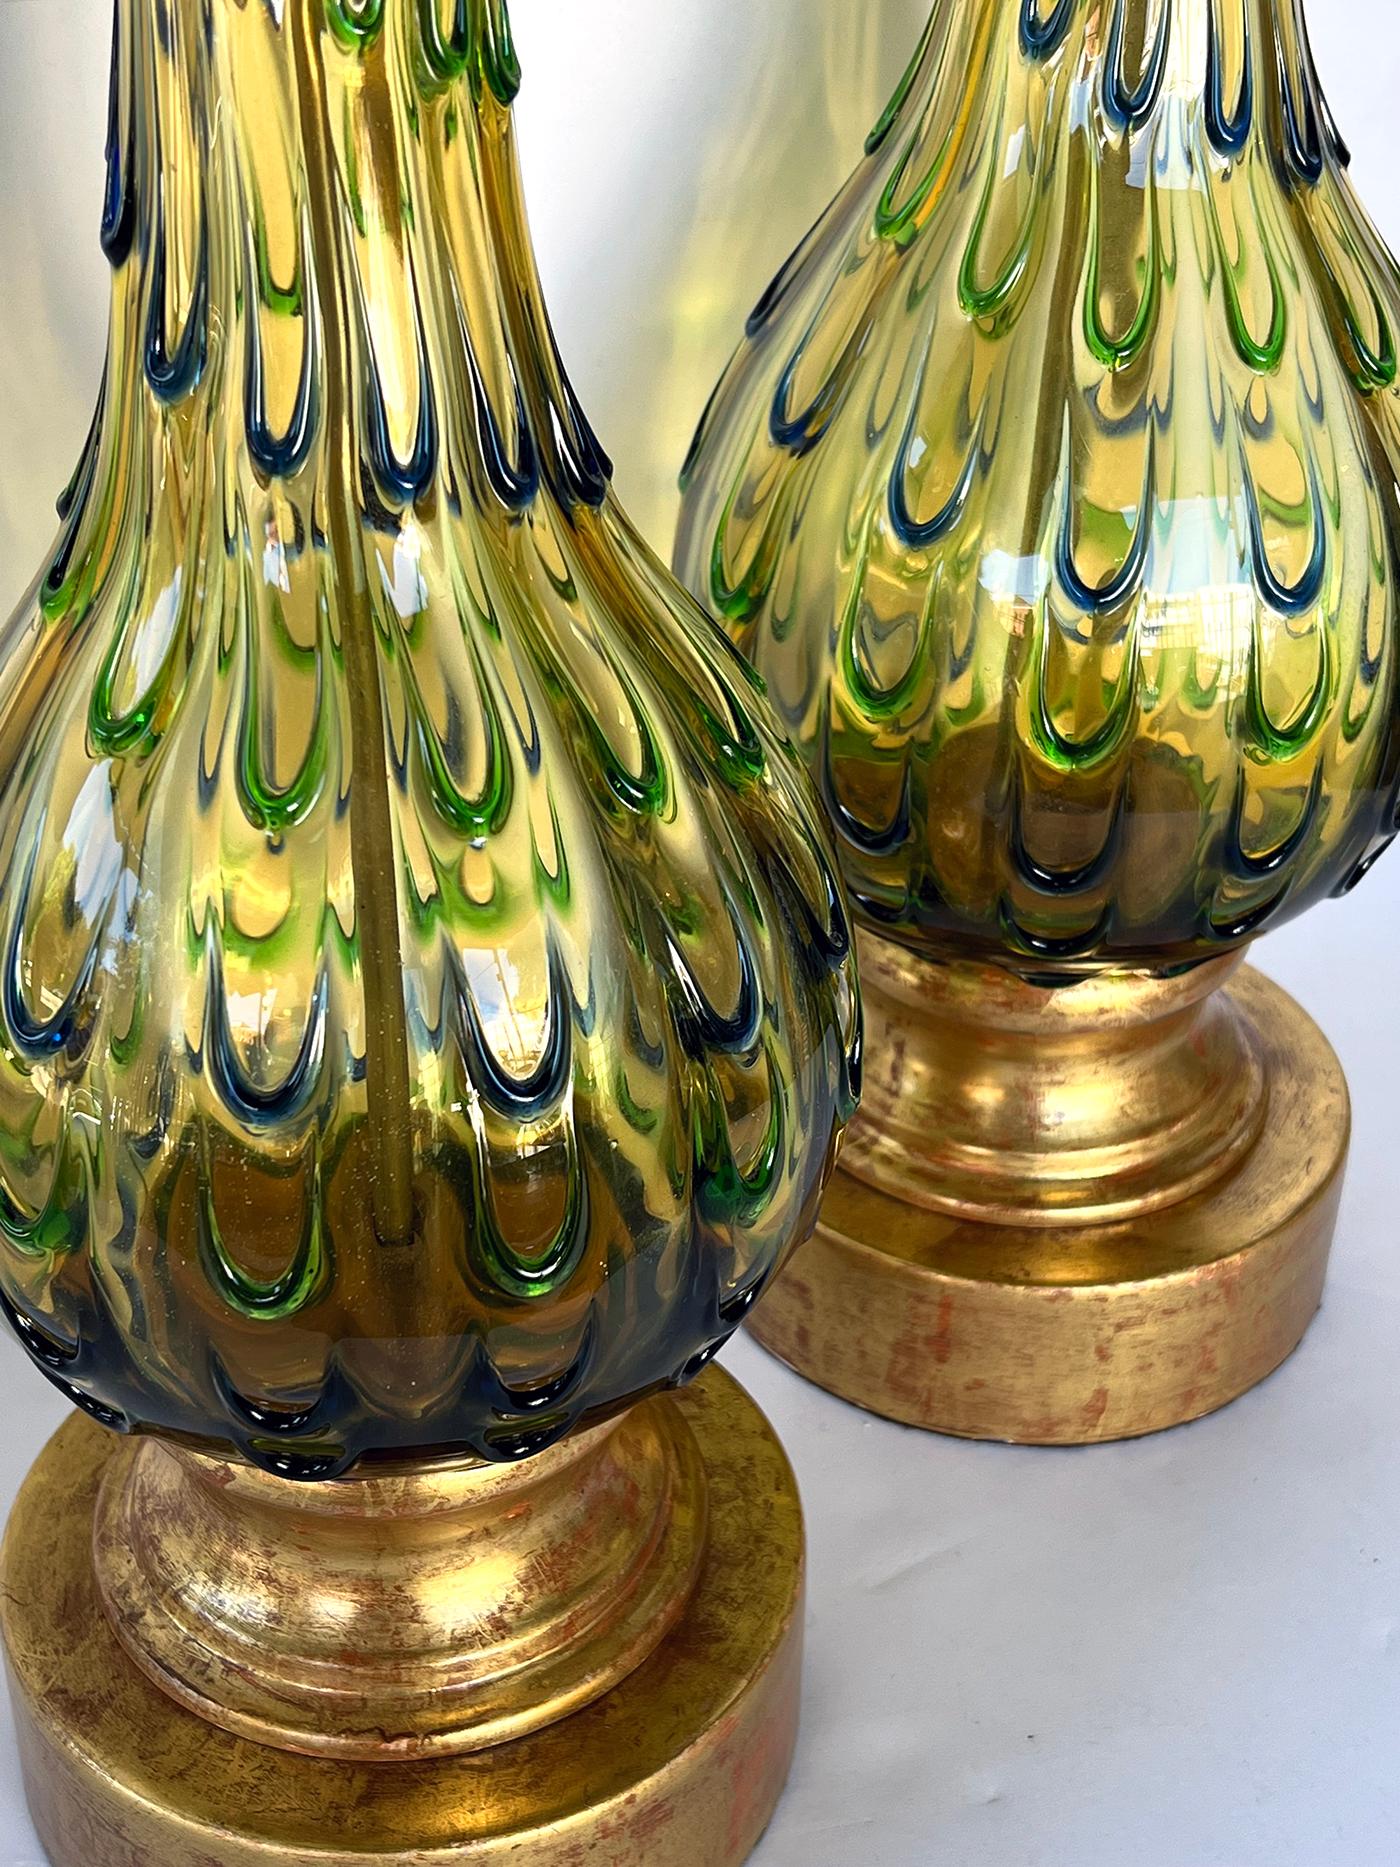 each bottle-form lamp of gold glass decorated overall with a watery blue and green thumb-print drip pattern; resting on a gilt-metal base